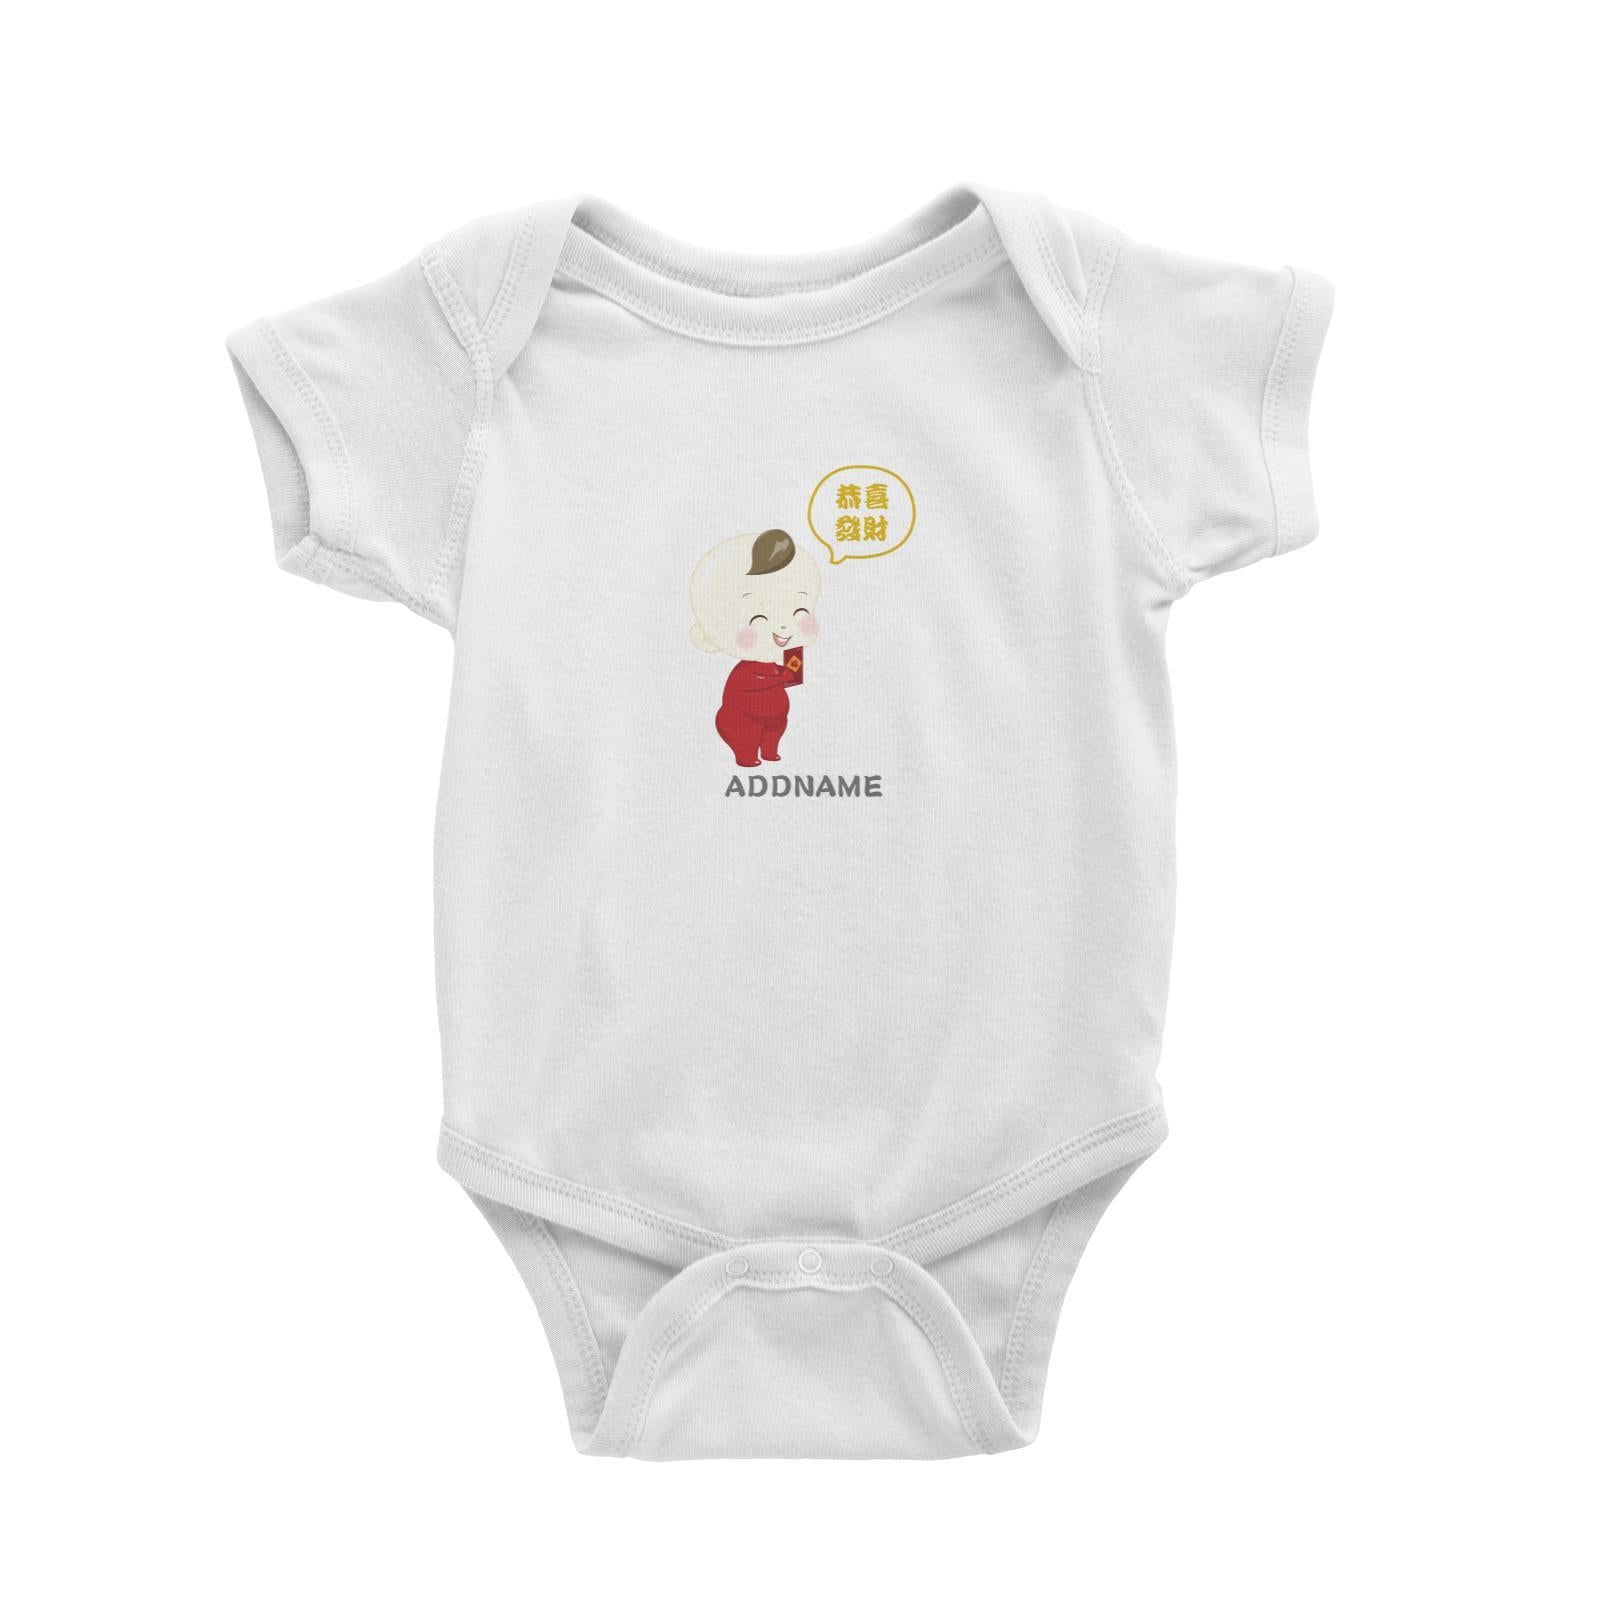 Chinese New Year Family Gong Xi Fai Cai Baby Boy Addname Baby Romper